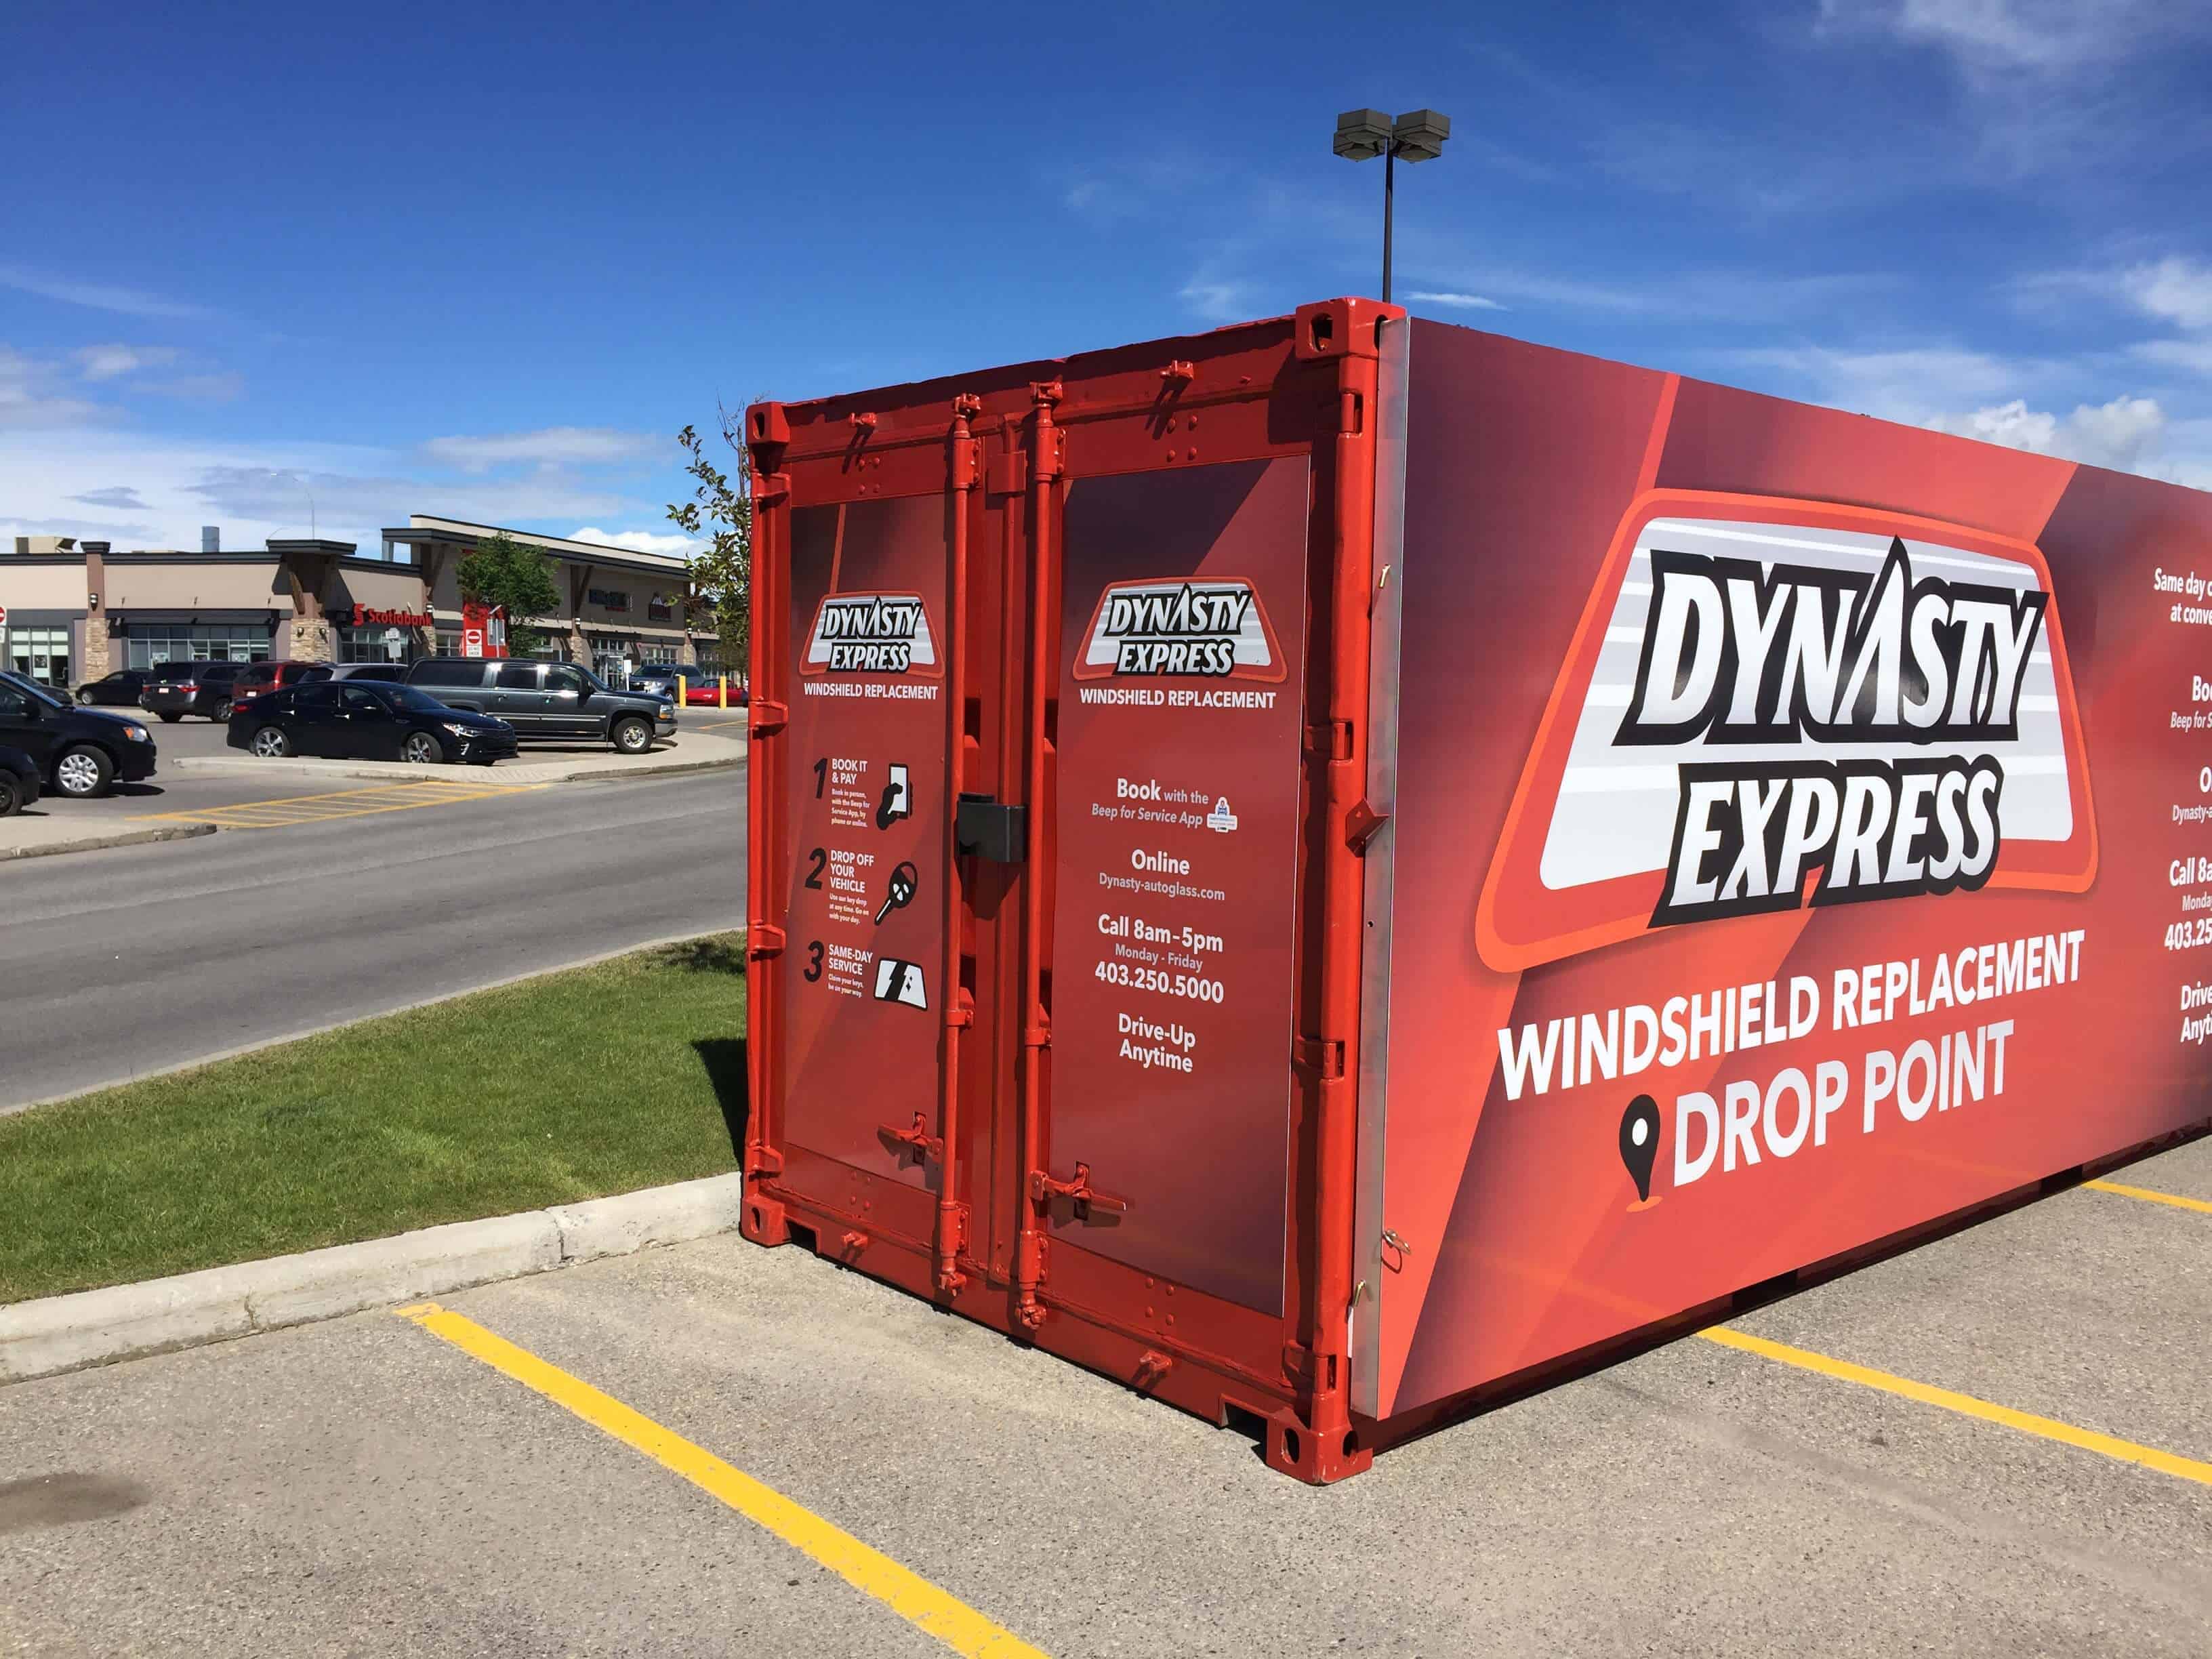 dynasty express satellite drop off point